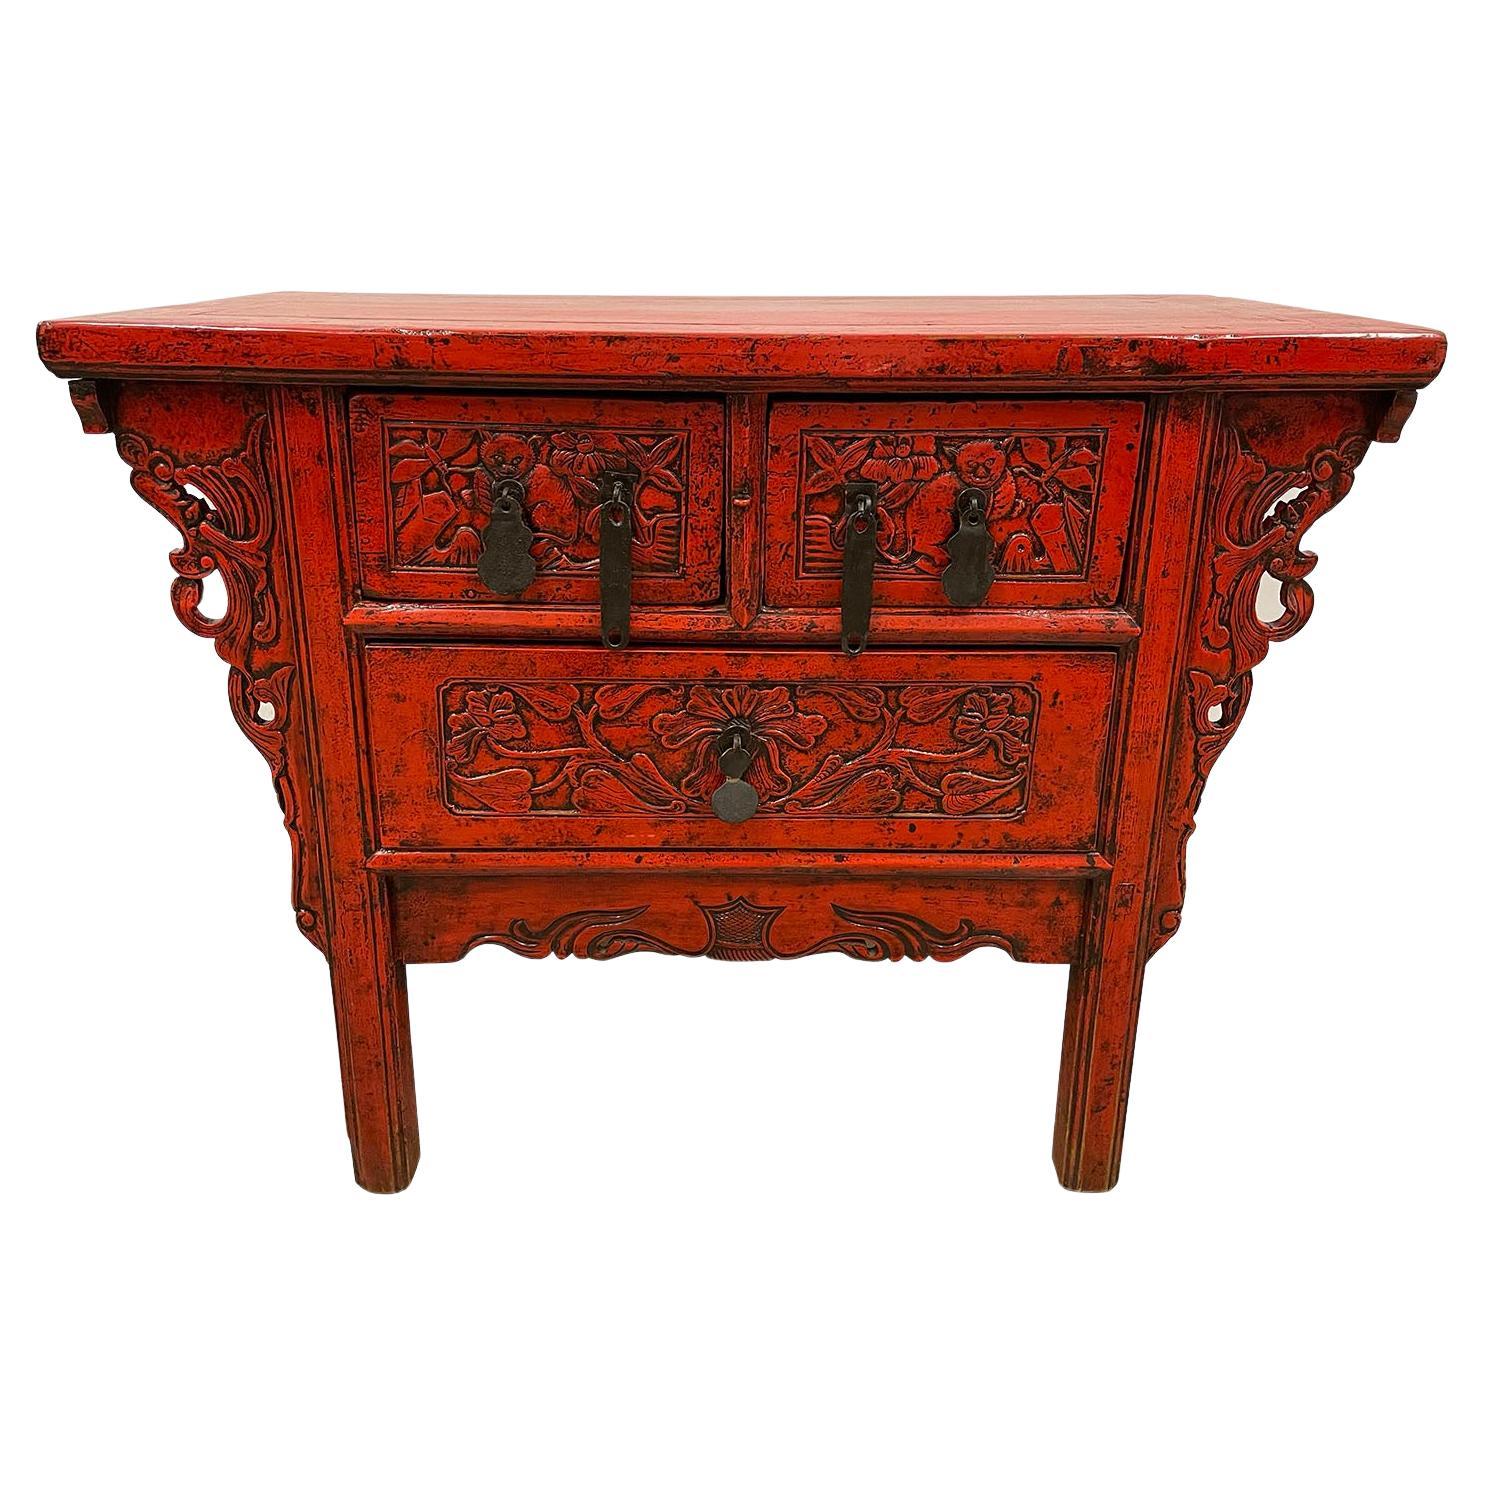 19th Century Antique Chinese Carved Red Lacquer Console Table / Sideboard For Sale